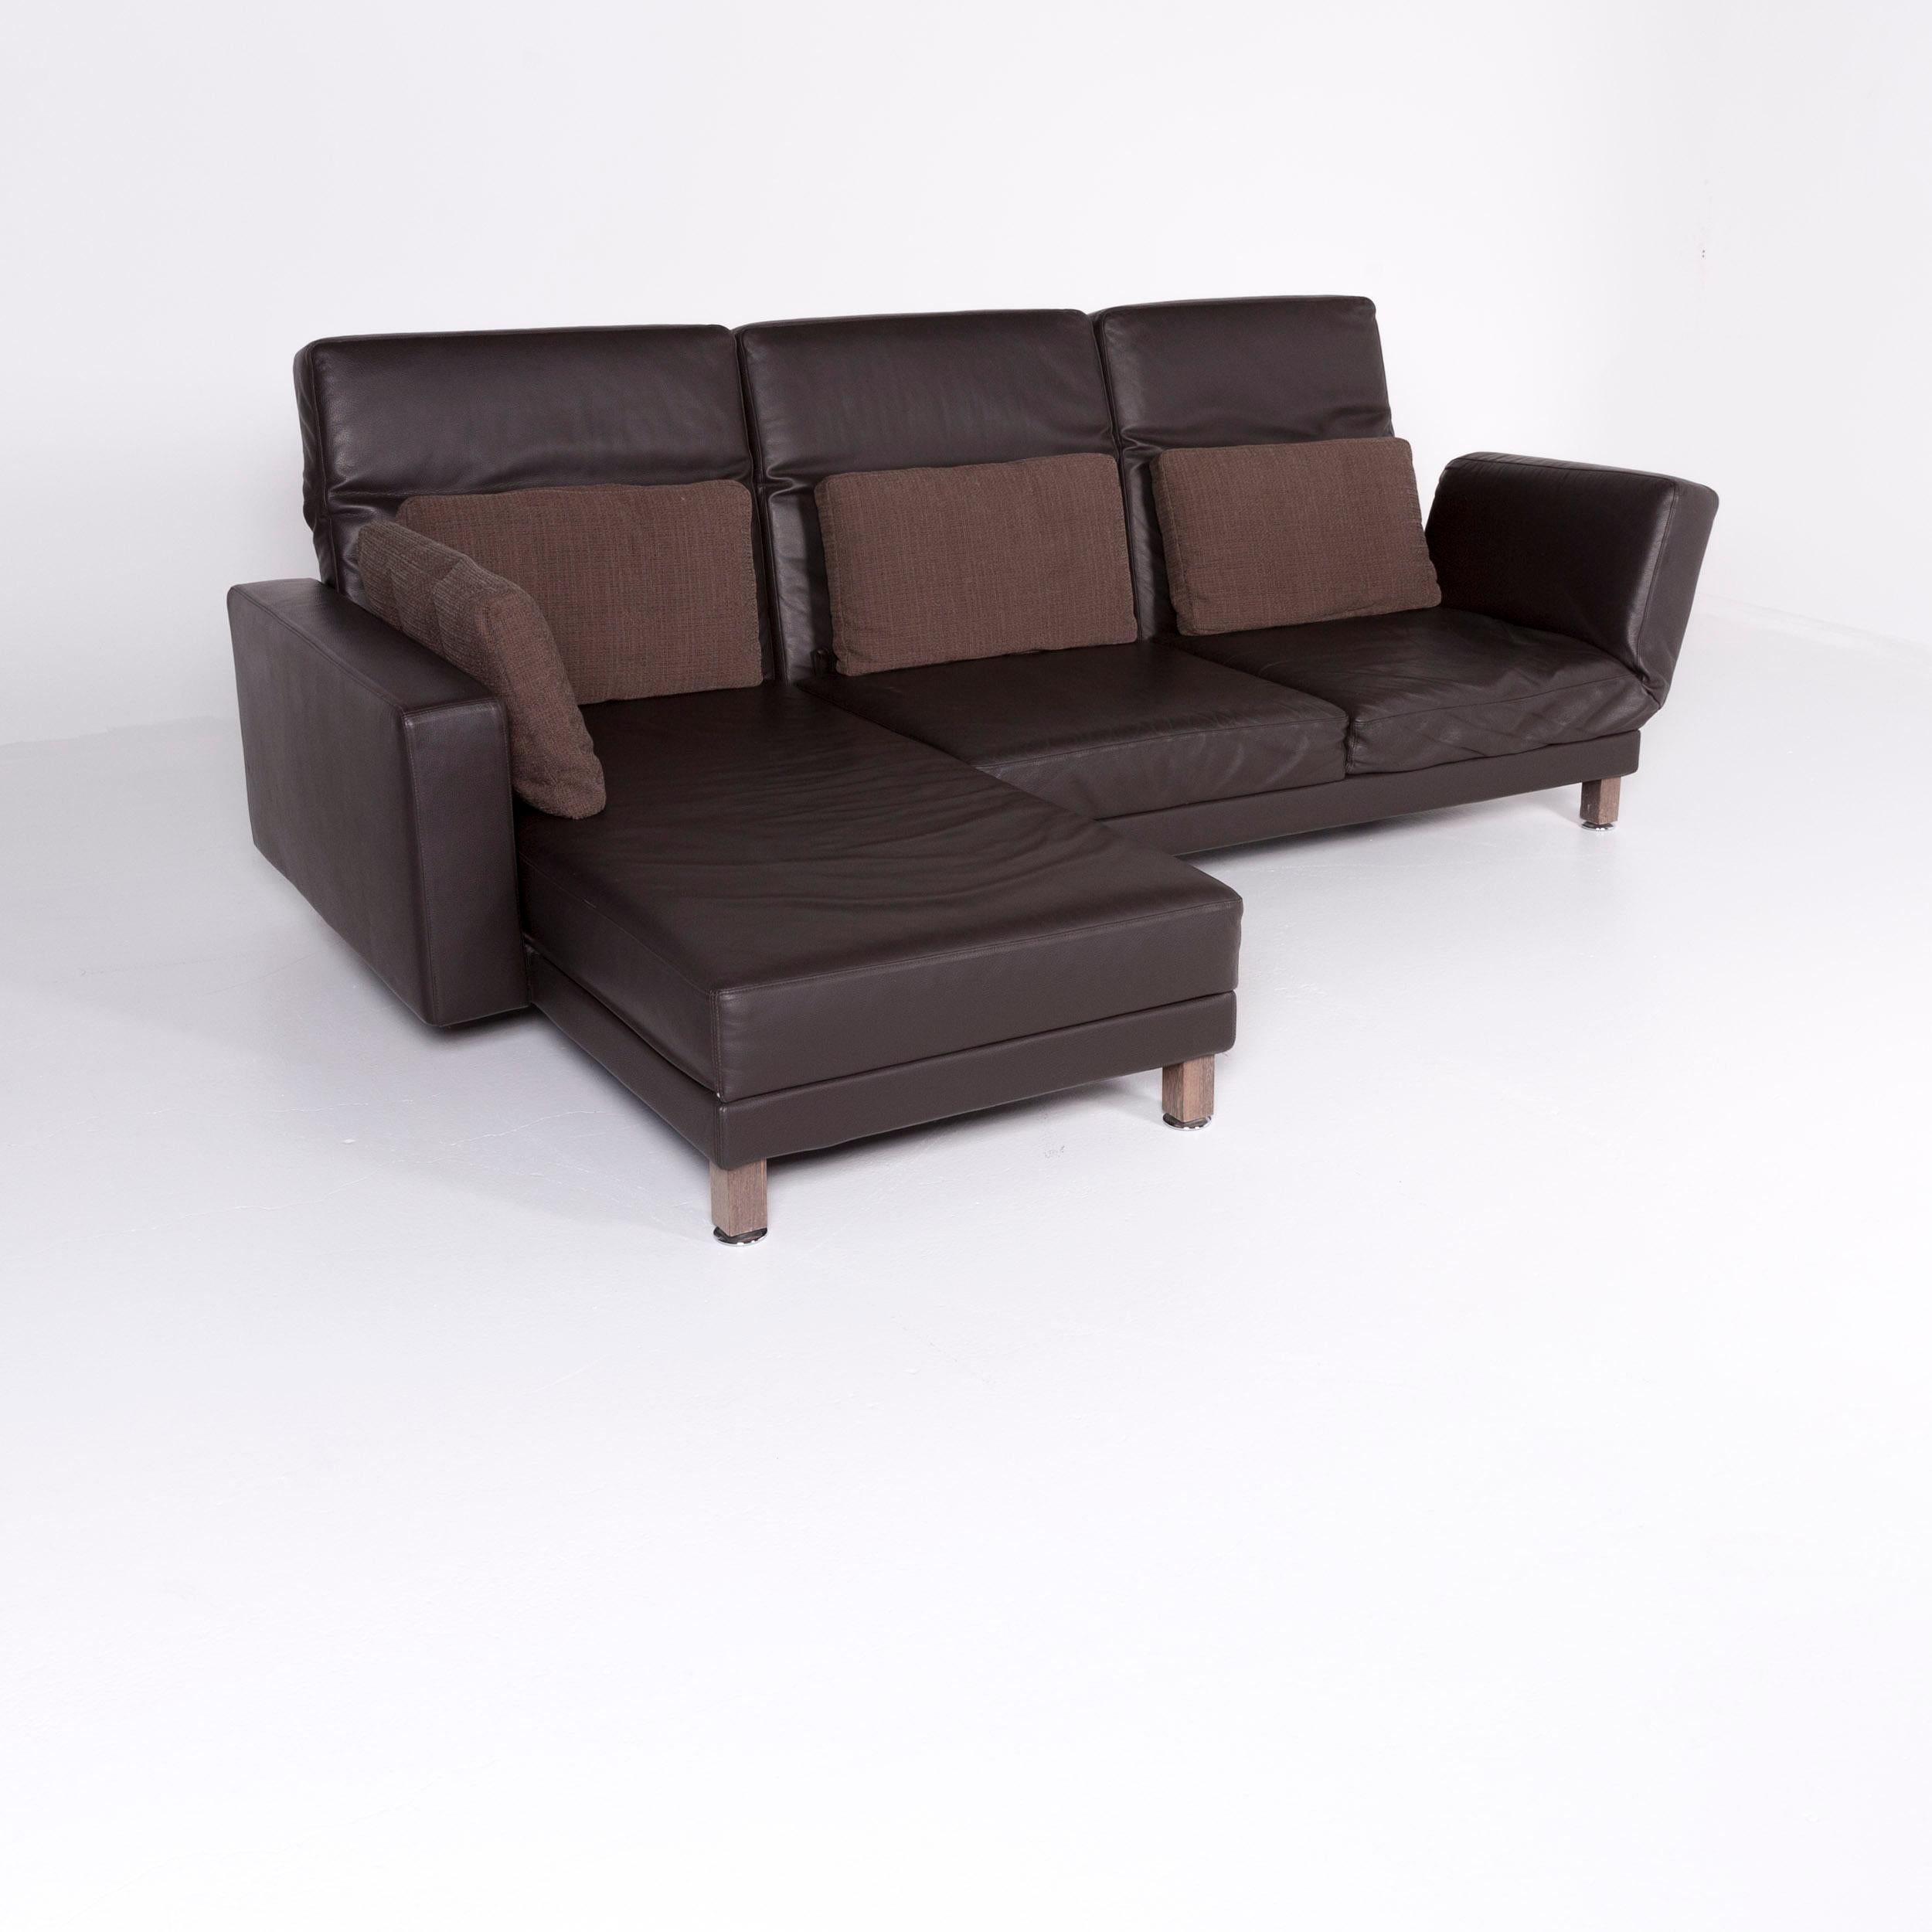 We bring to you a Brühl & Sippold Moule designer leather corner sofa brown genuine leather sofa.

Product measurements in centimeters:

Depth 95
Width 270
Height 93
Seat-height 38
Rest-height 38
Seat-depth 70
Seat-width 225
Back-height